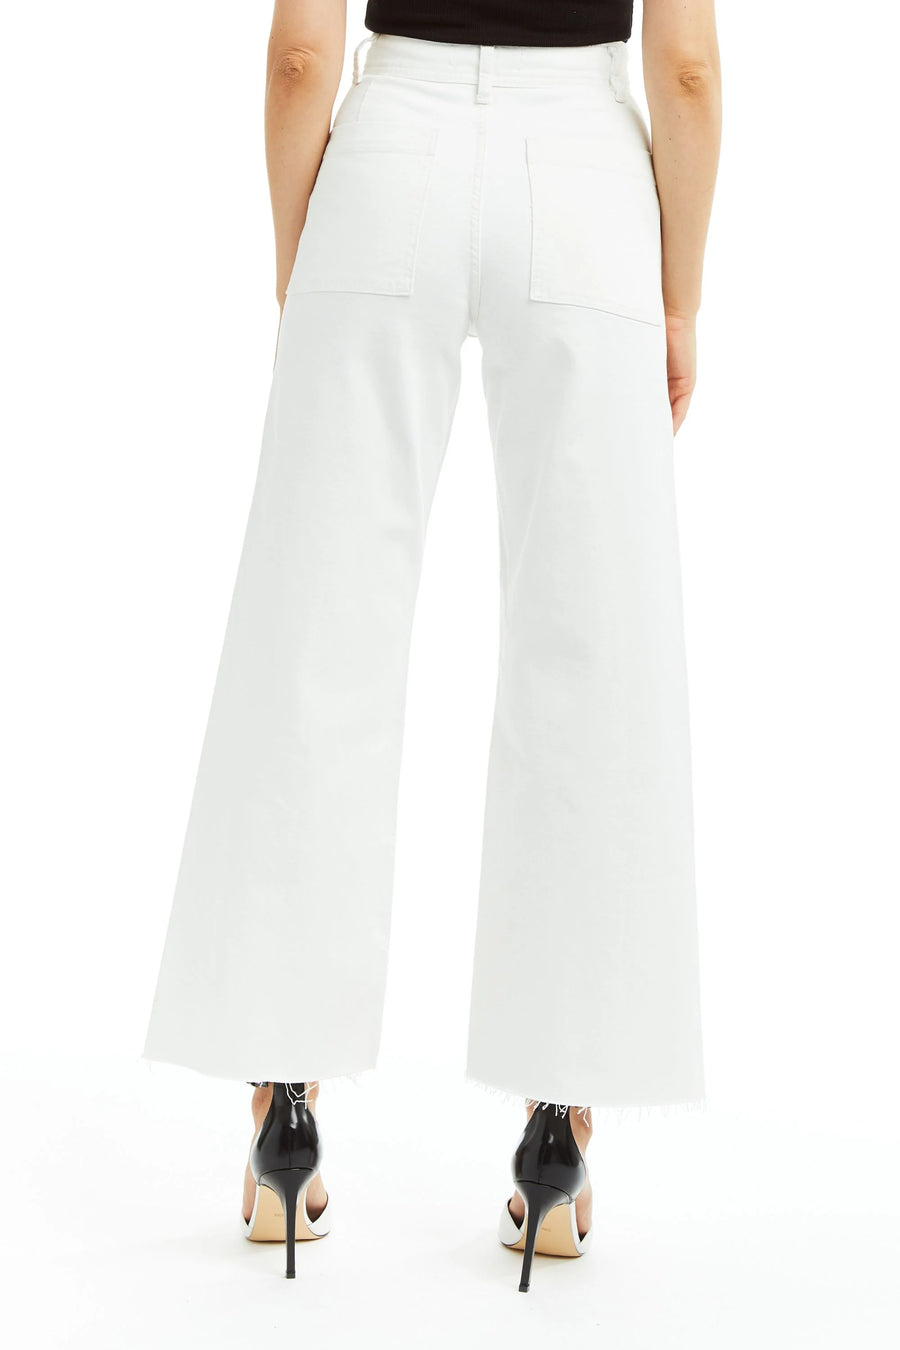 Tractr Alice-High Rise Wide Straight Ankle Crop Fray Leg